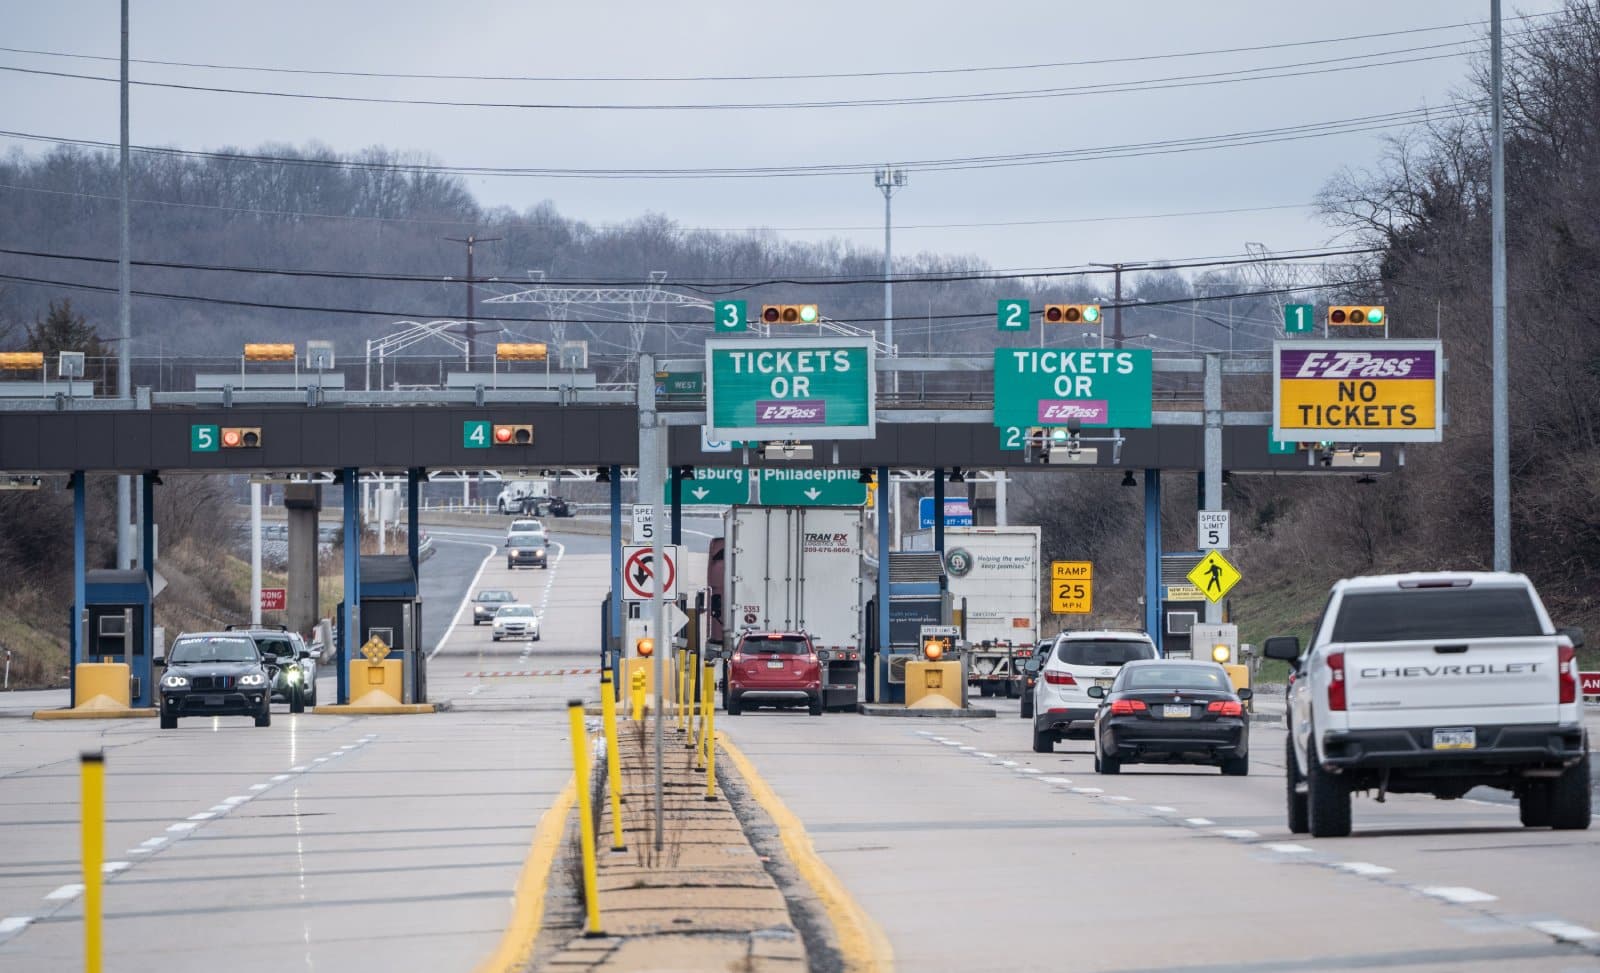 Image Credit: Shutterstock / Amy Lutz <p><span>Annual toll hikes on the Pennsylvania Turnpike are a tradition commuters dread, but can always count on.</span></p>